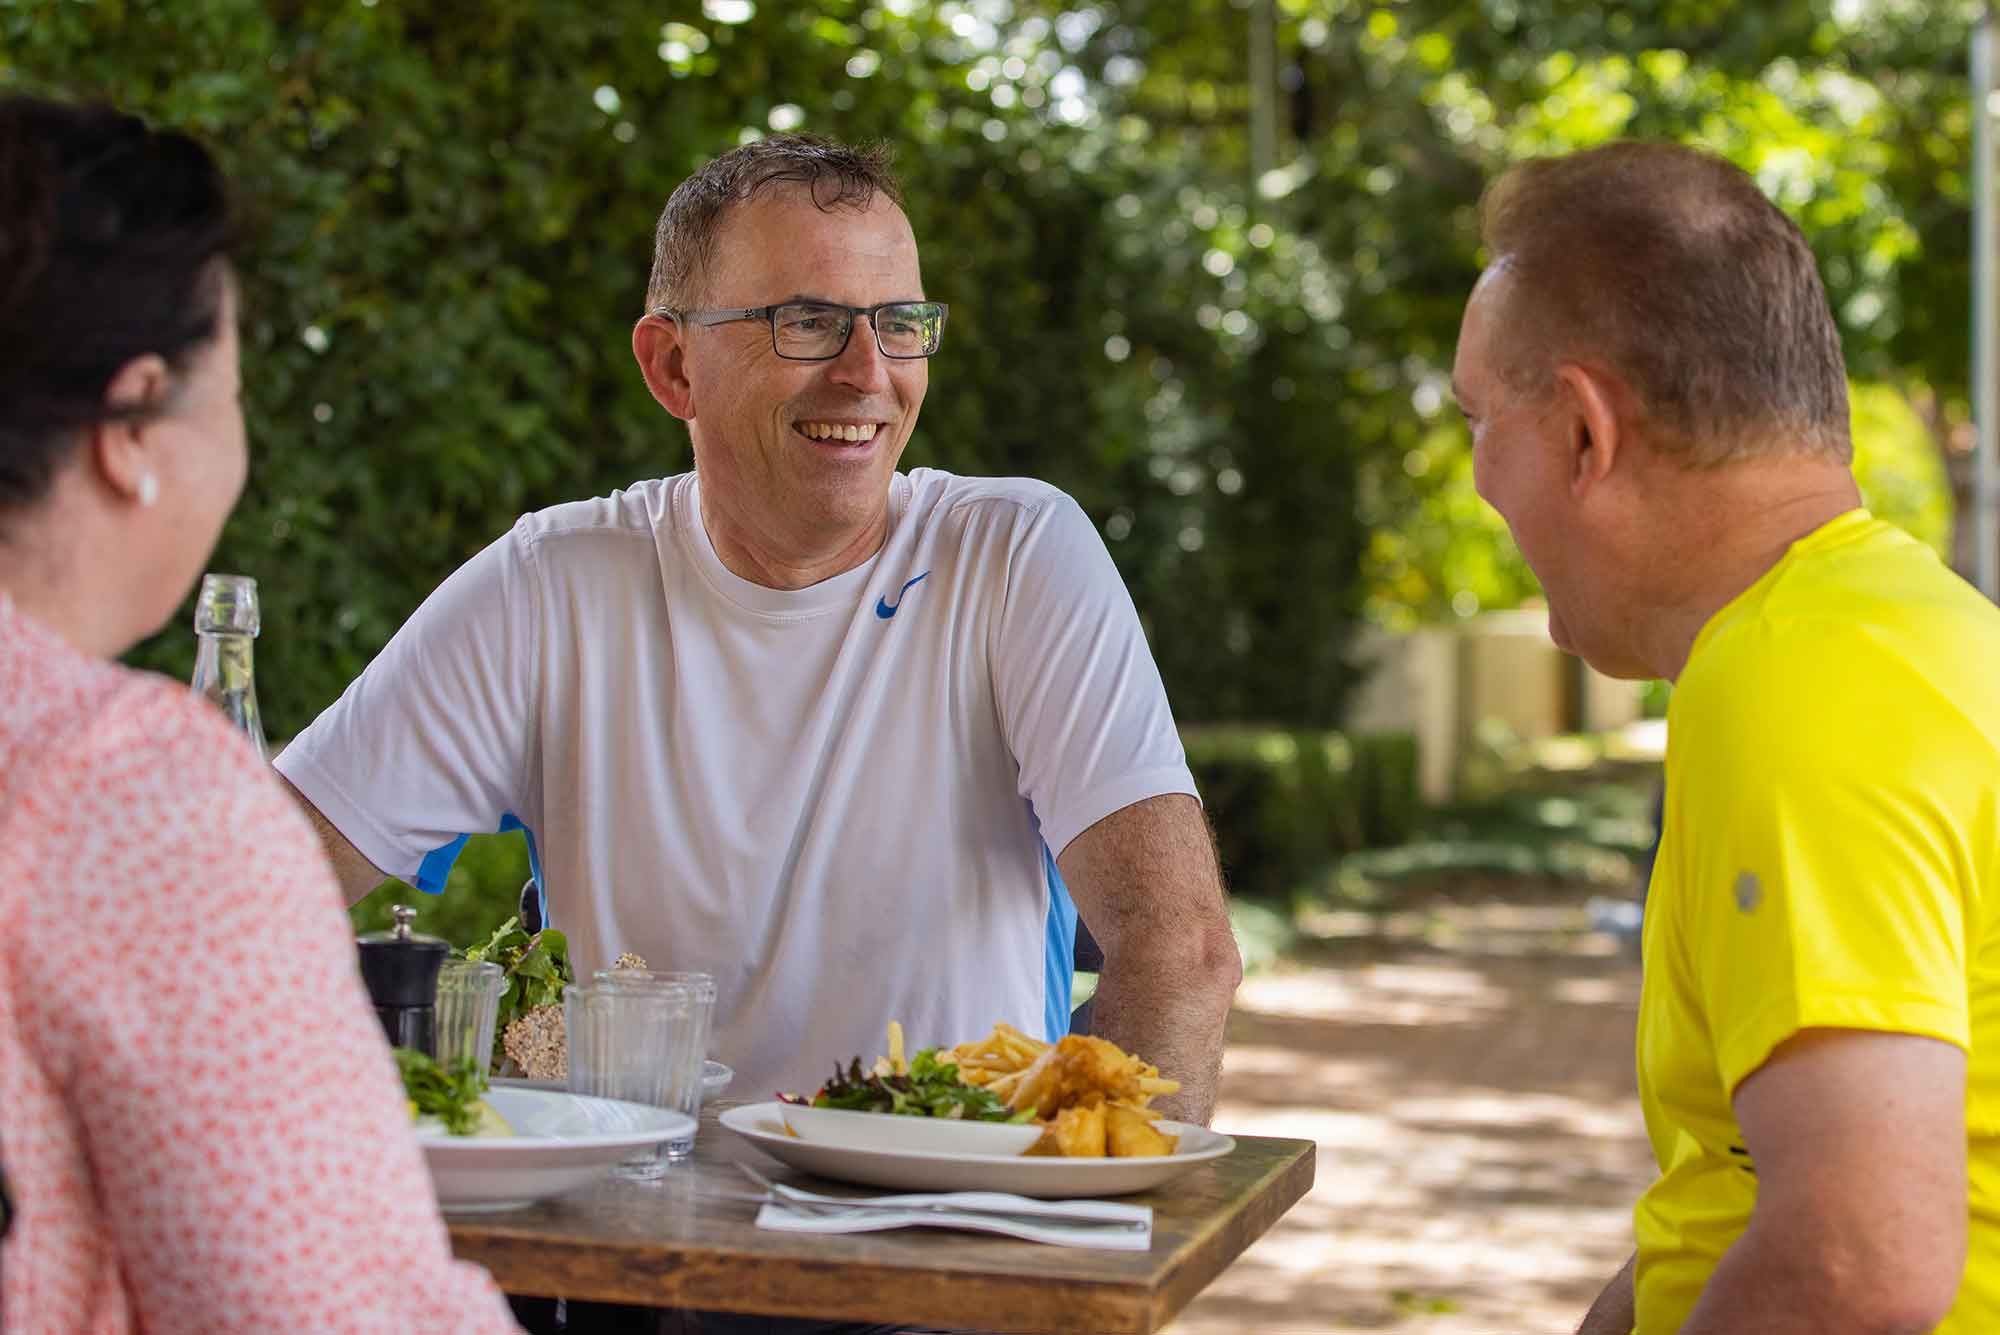 A Man Chatting and Enjoying Lunch with His Friends